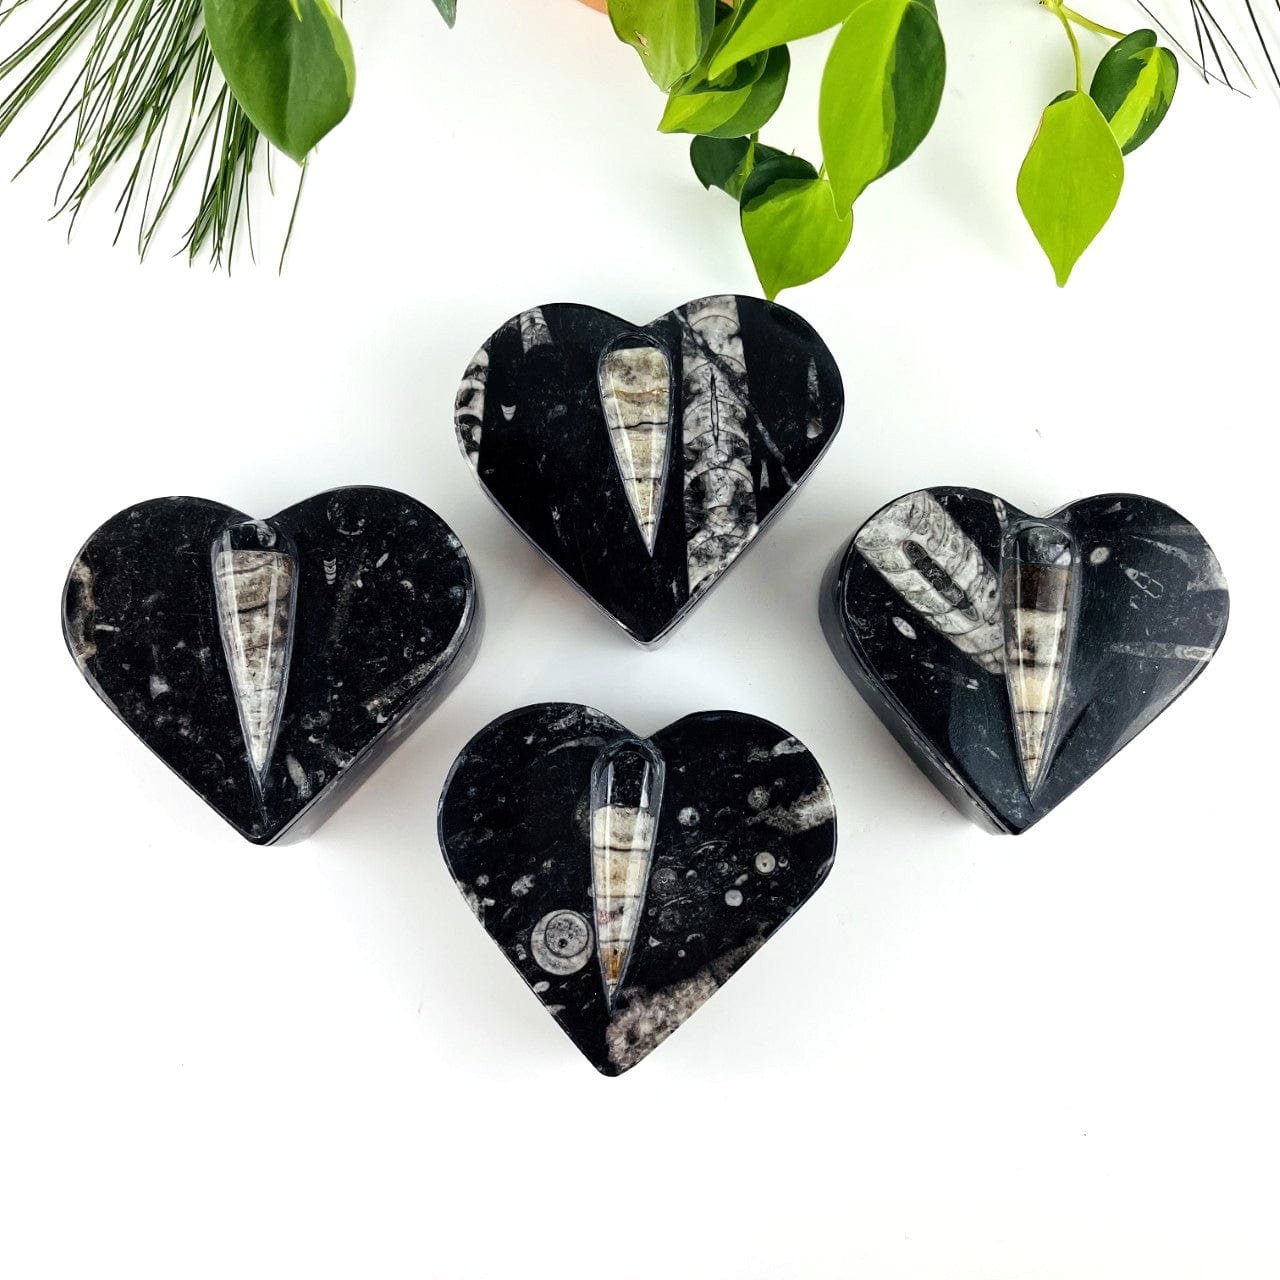 4 Orthoceras Fossil Heart Boxes to show varying stones